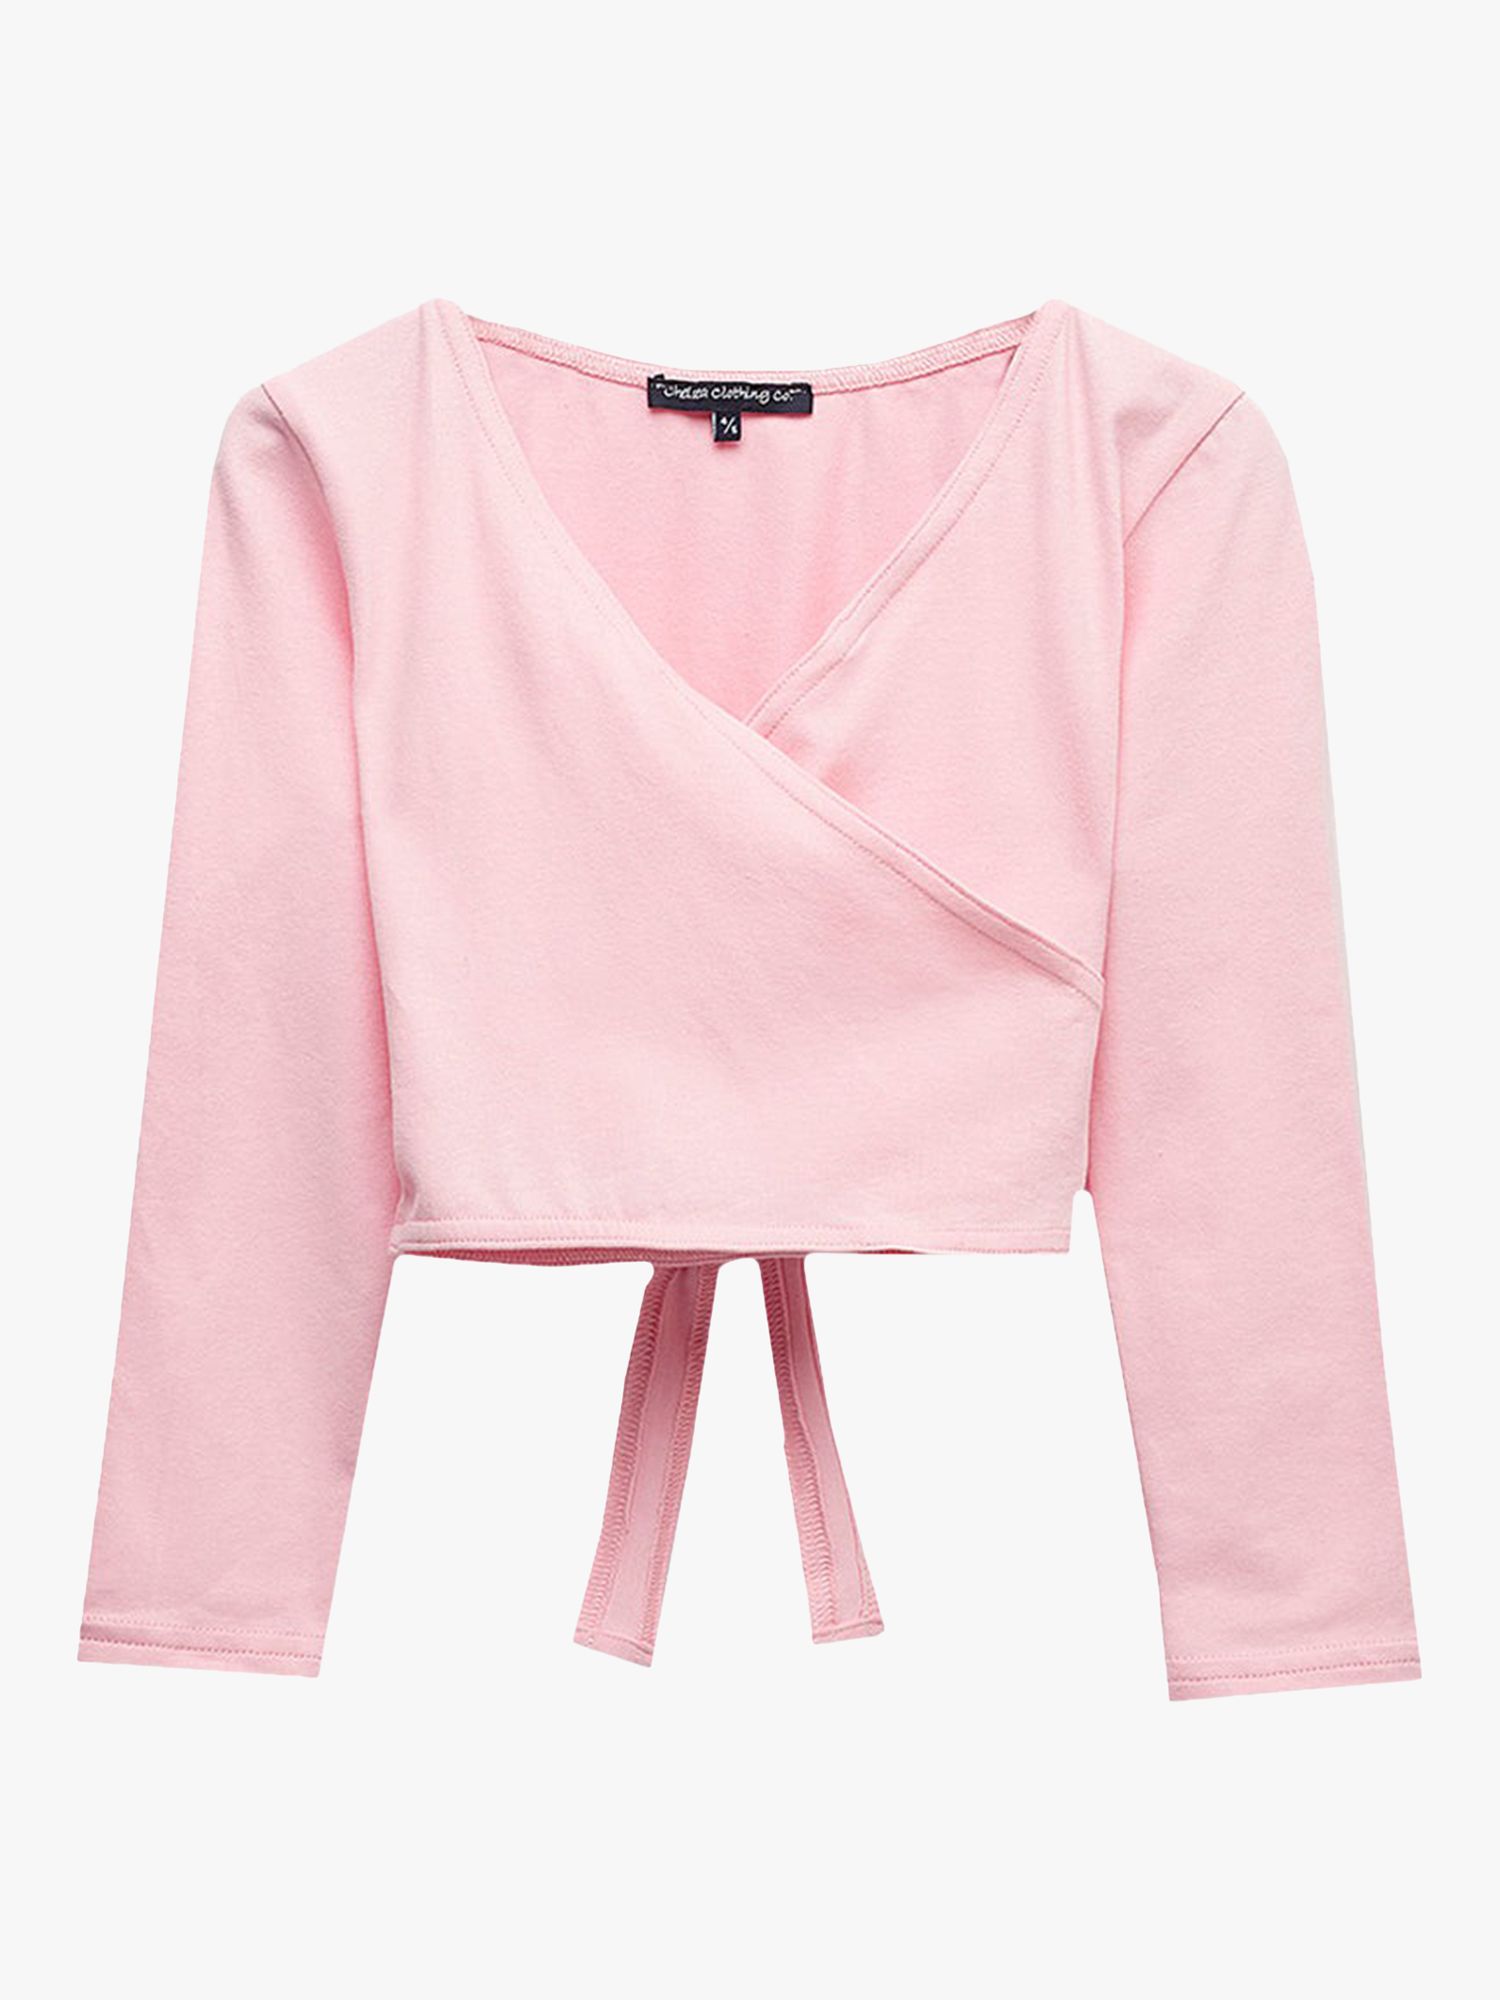 Buy Trotters Company Kids' Ballet Wrap Cardigan, Pink Online at johnlewis.com